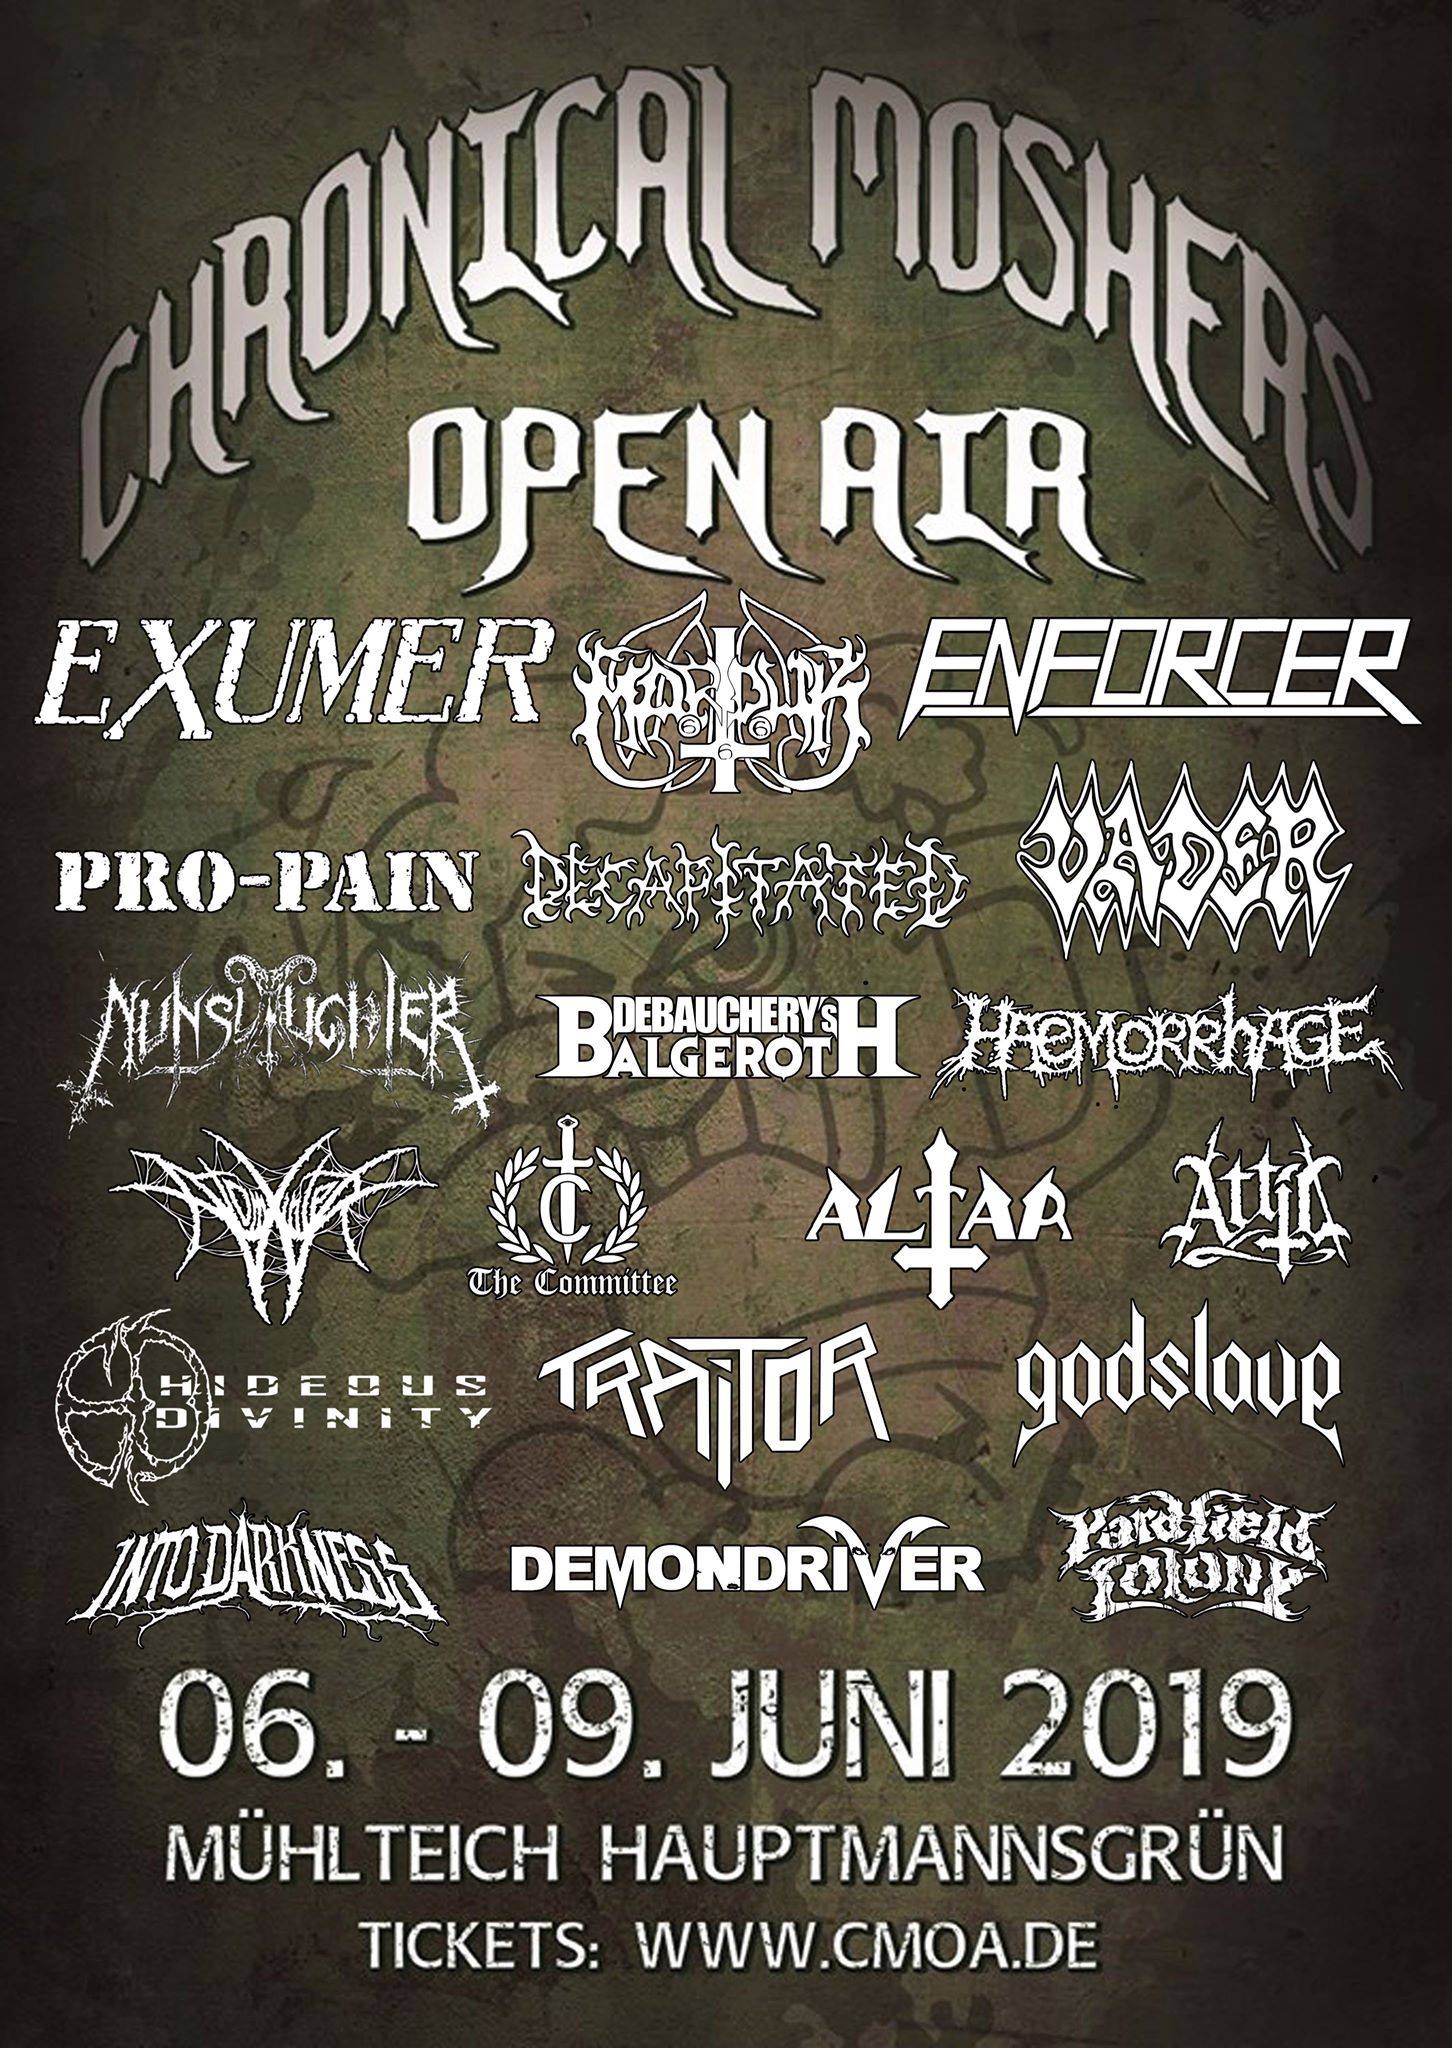 Chronicle Moshers Open Air